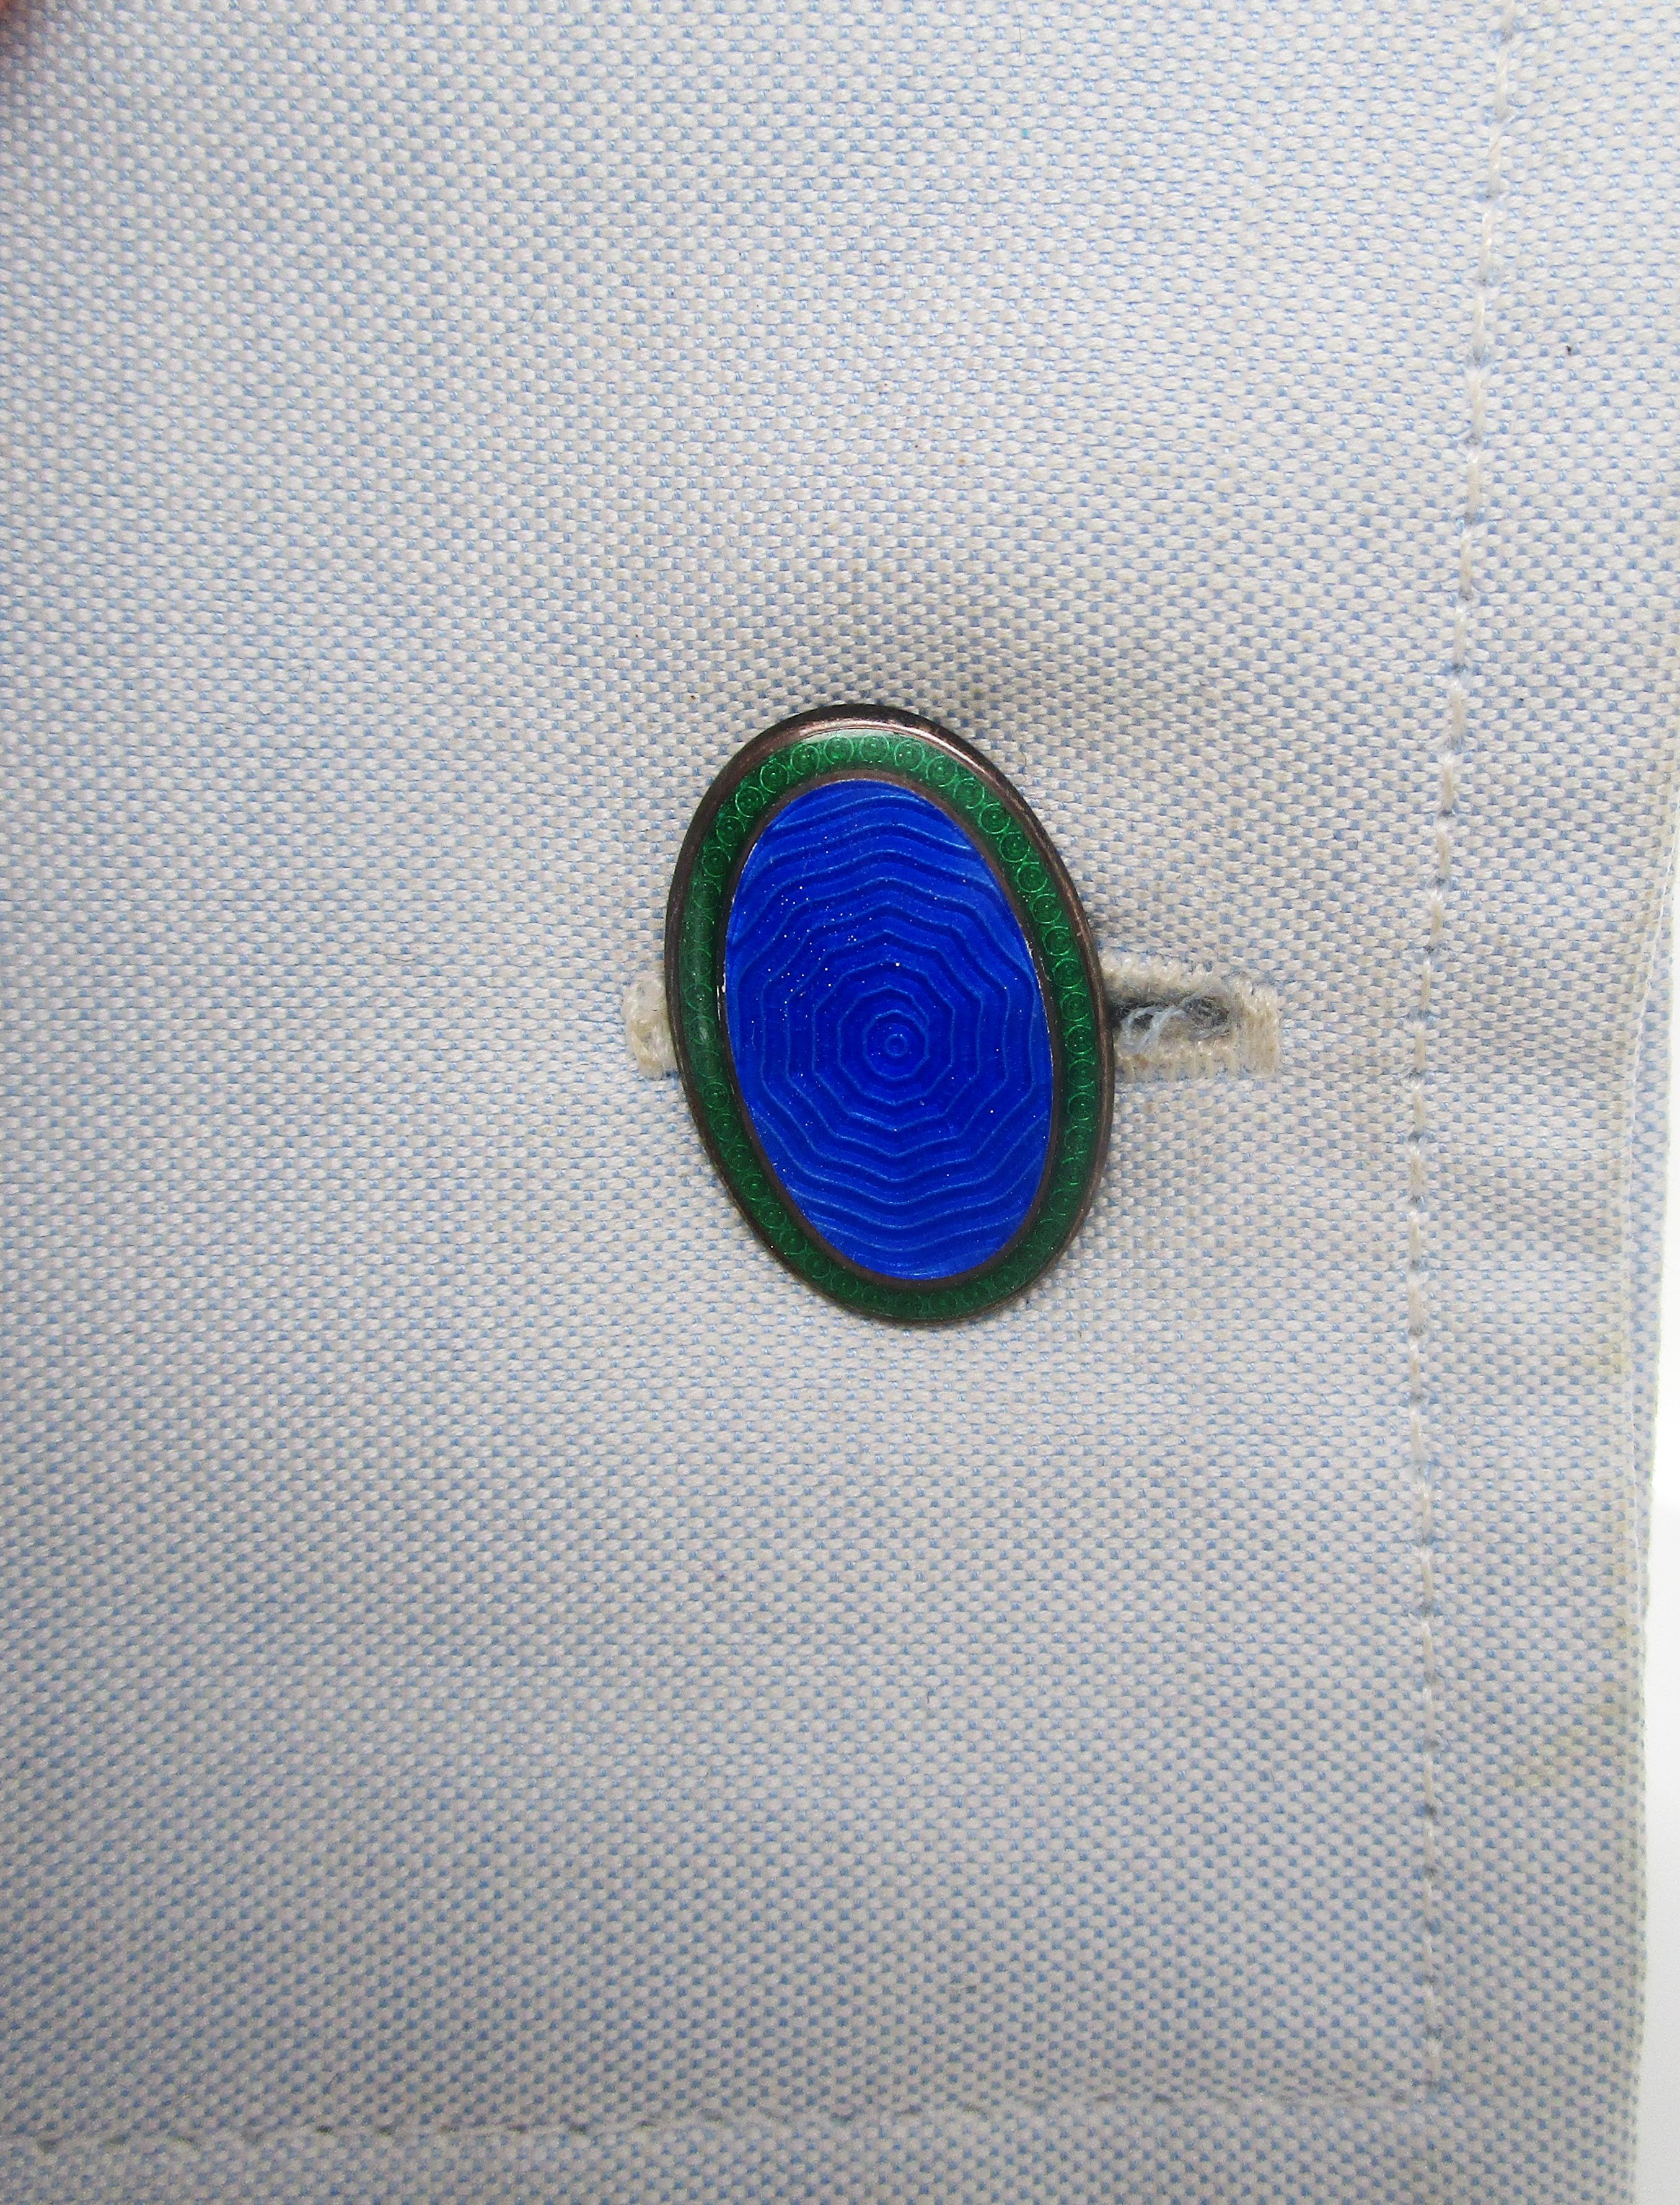 Art Deco Sterling Silver Green and Blue Enamel Cufflinks In Good Condition For Sale In Lexington, KY